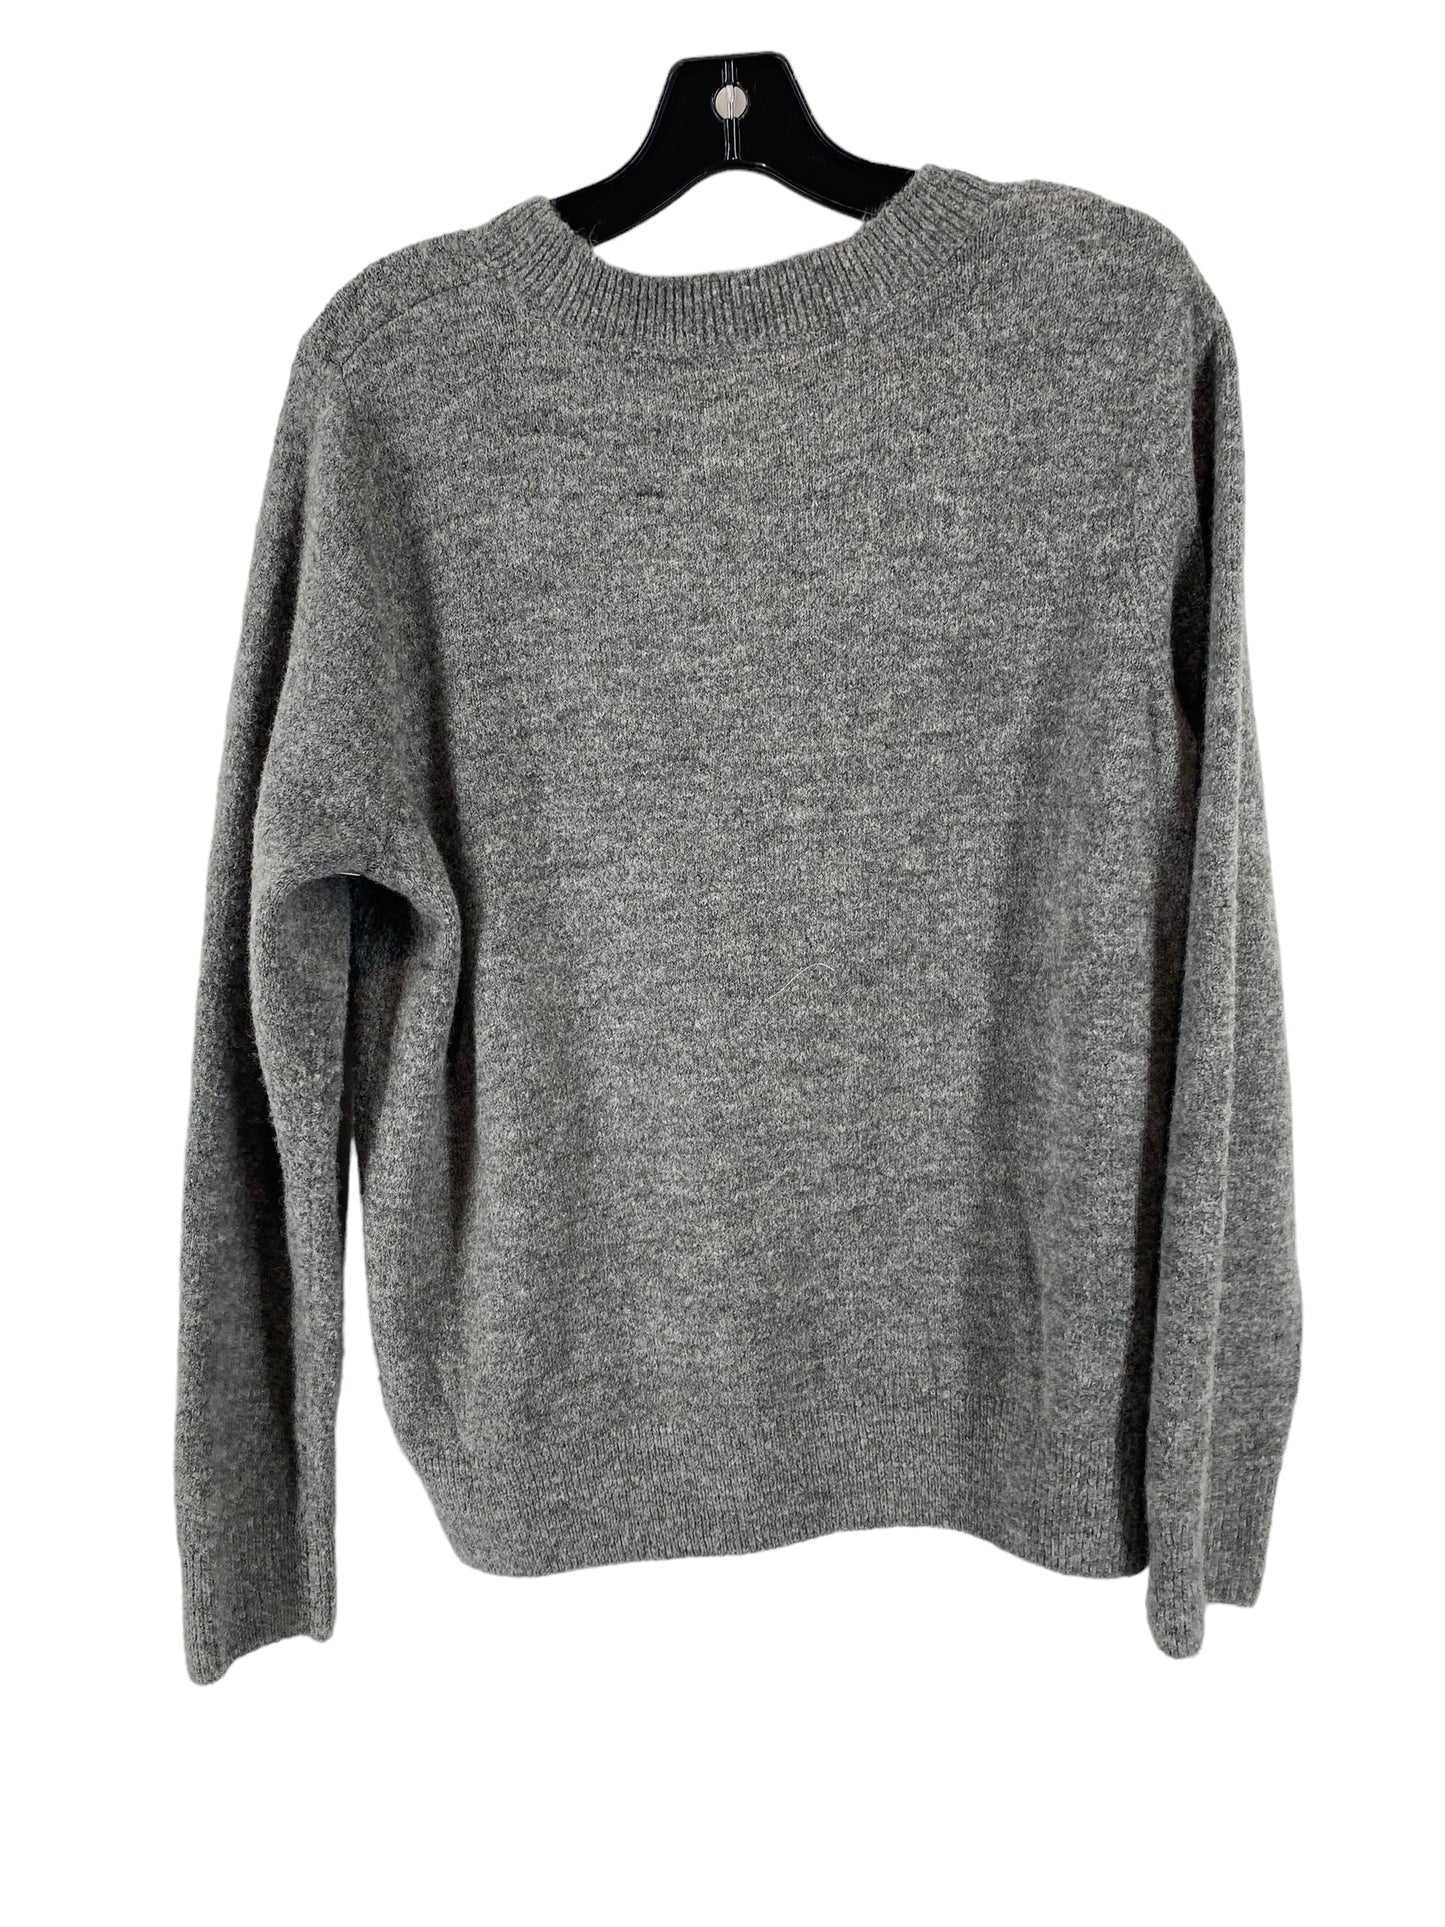 Sweater By H&m  Size: M